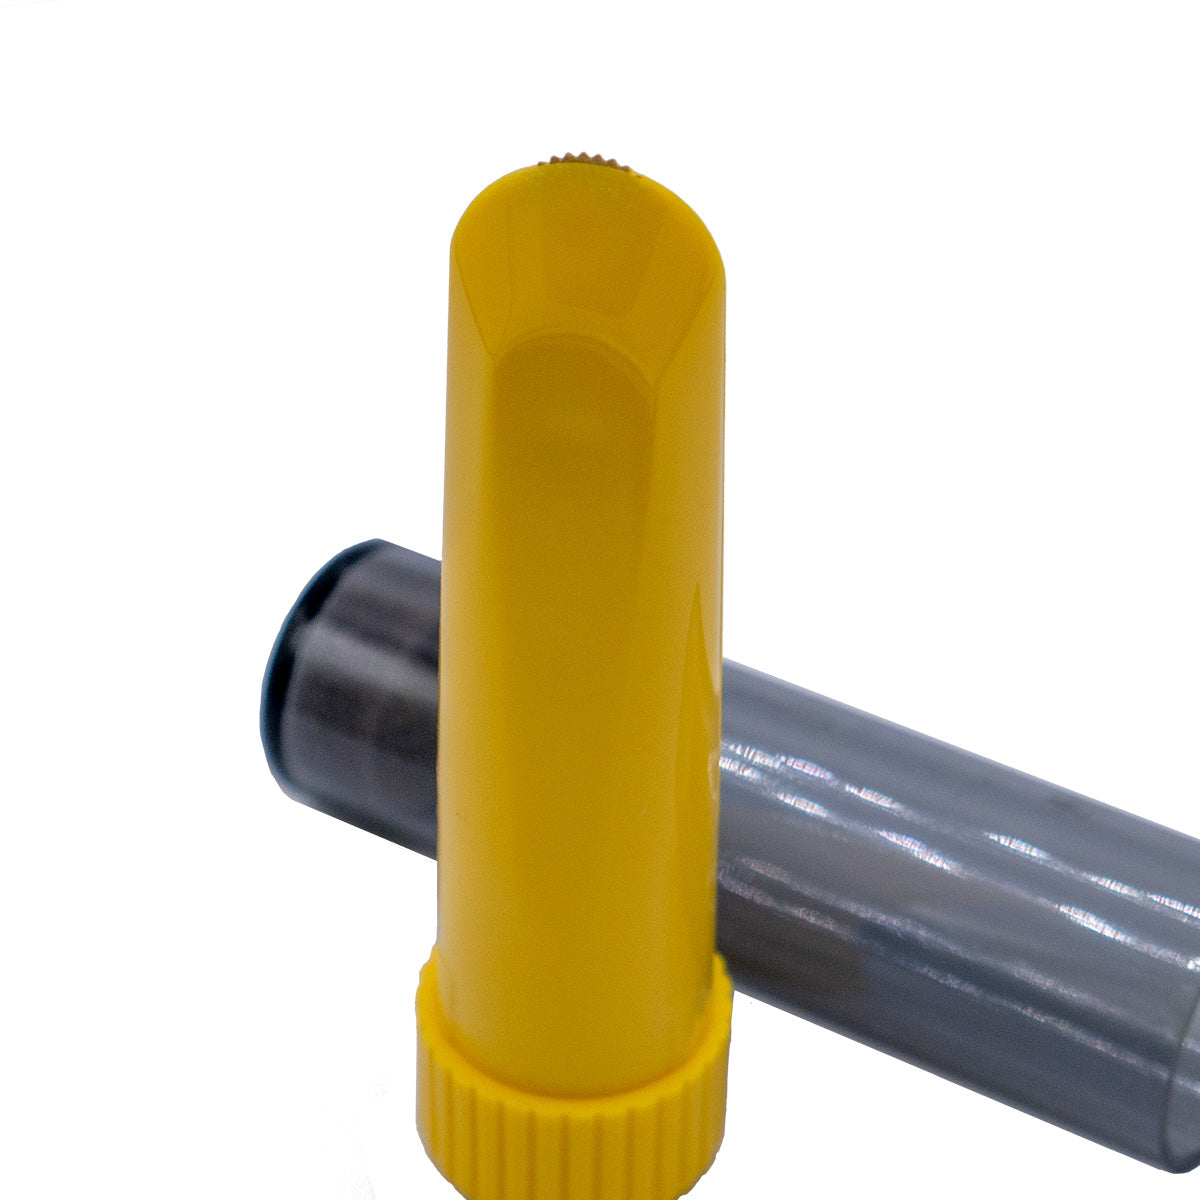 The yellow chalk wheel liner positioned upright outside of its packaging. The cap is resting horizontally behind it.